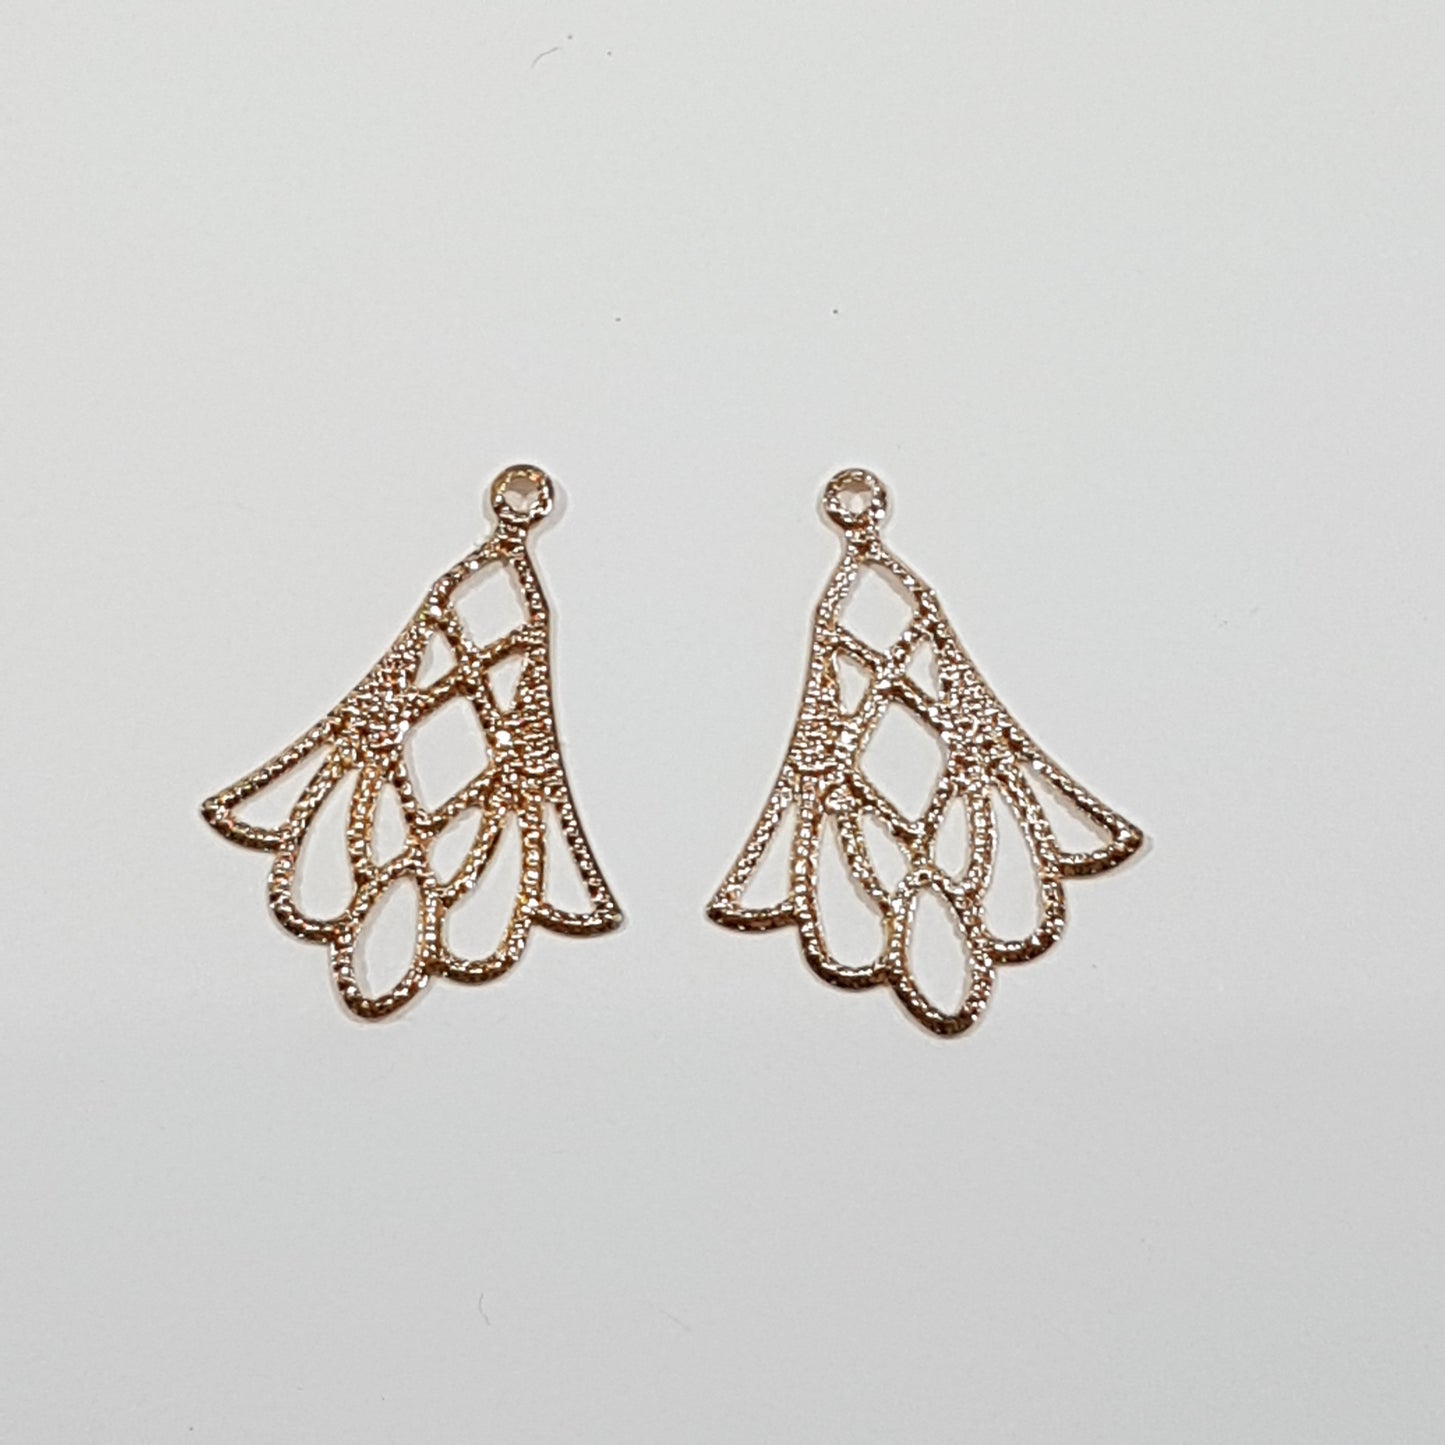 2pc Rose Gold Chandelier Findings